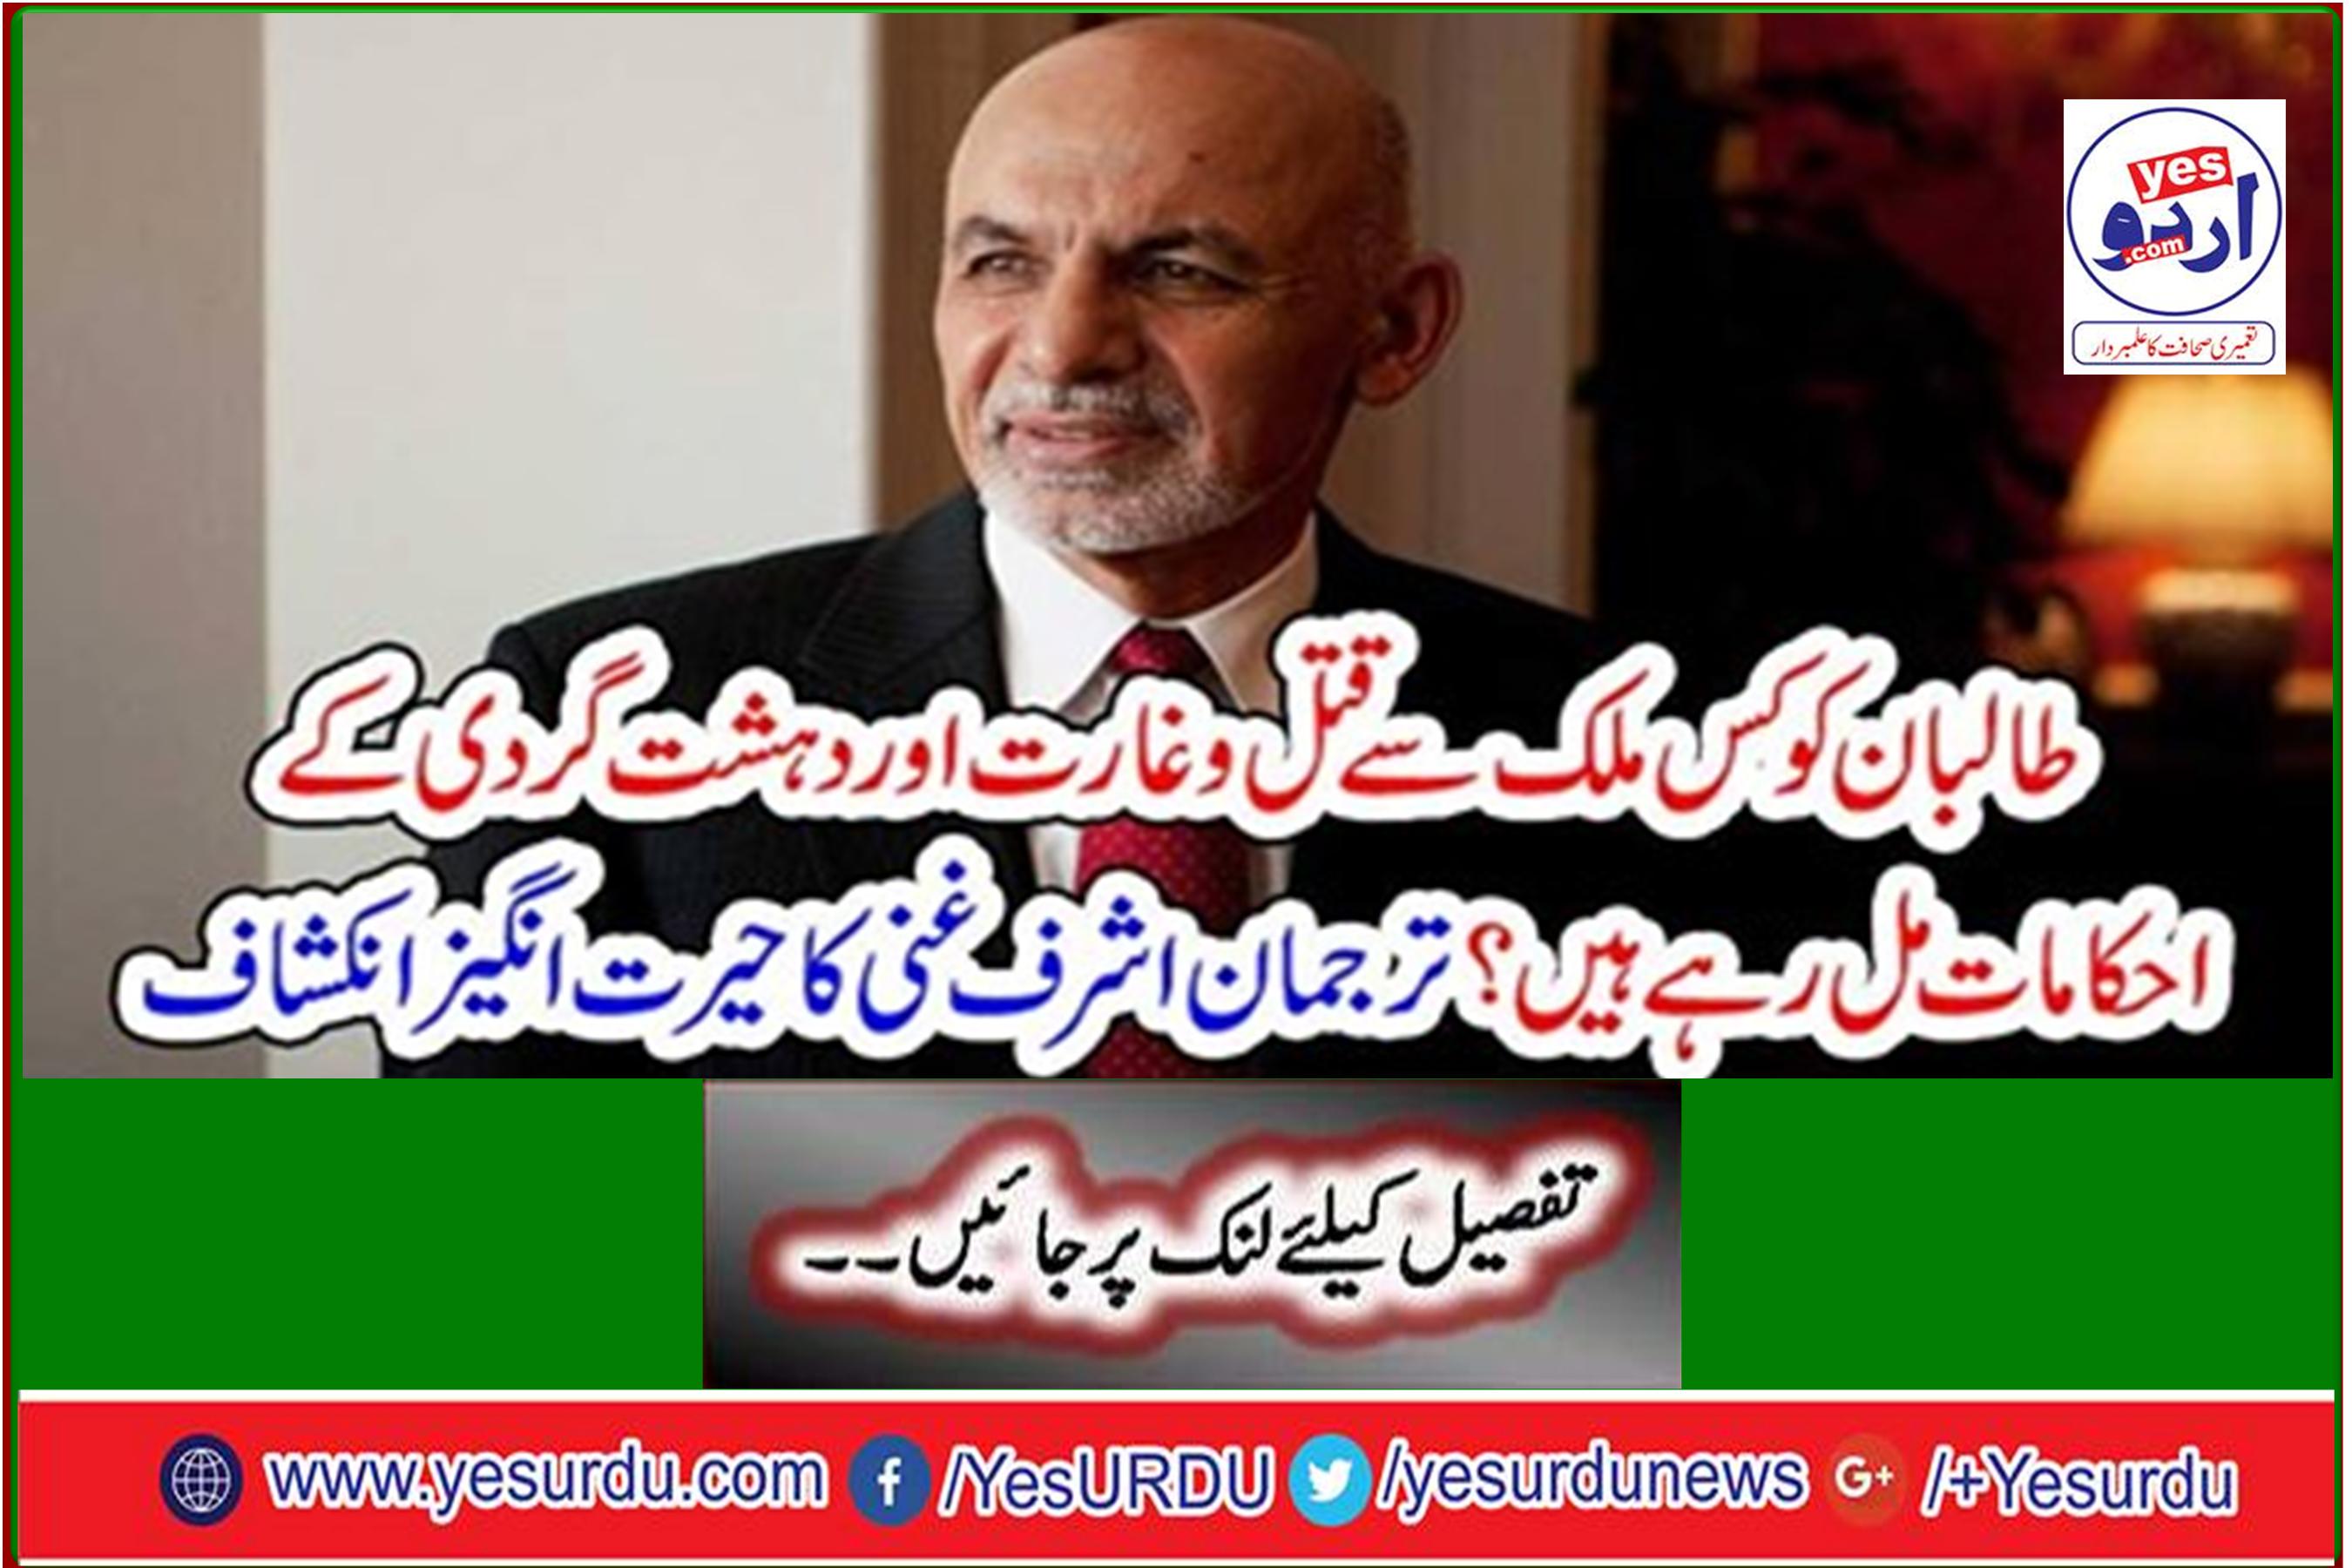 From which country is the Taliban receiving orders for killings and terrorism? Wonderful revelation by spokesman Ashraf Ghani